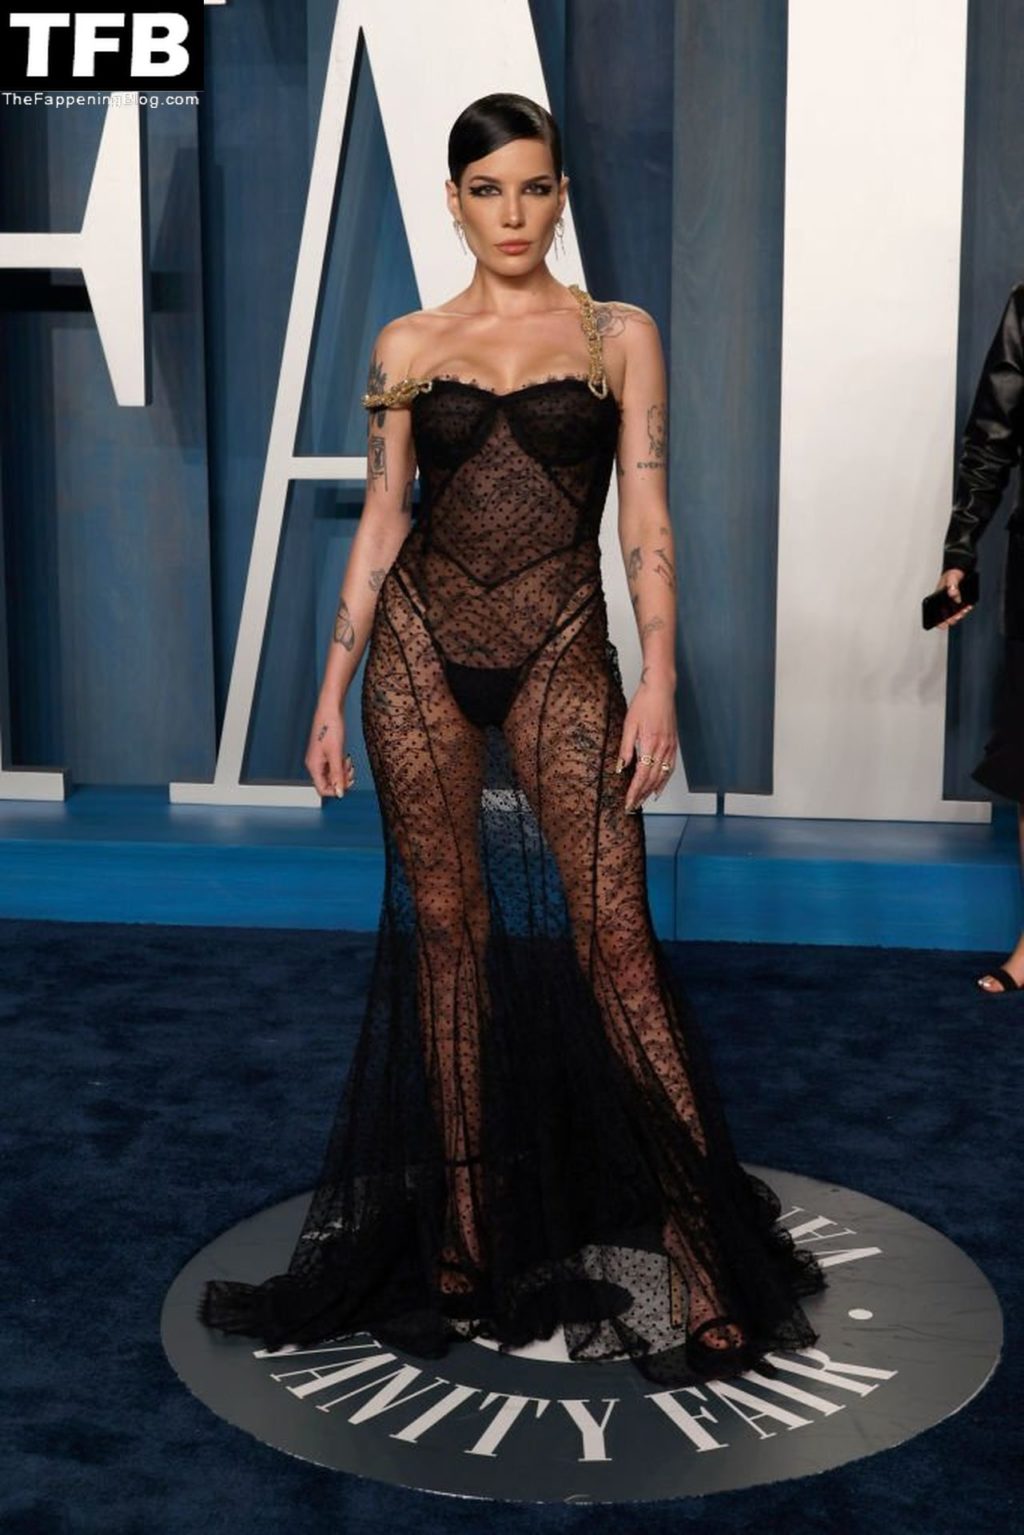 Halsey Sexy The Fappening Blog 1 2 1024x1535 - Halsey Looks Hot in a See-Through Dress at the 2022 Vanity Fair Oscar Party (11 Photos)